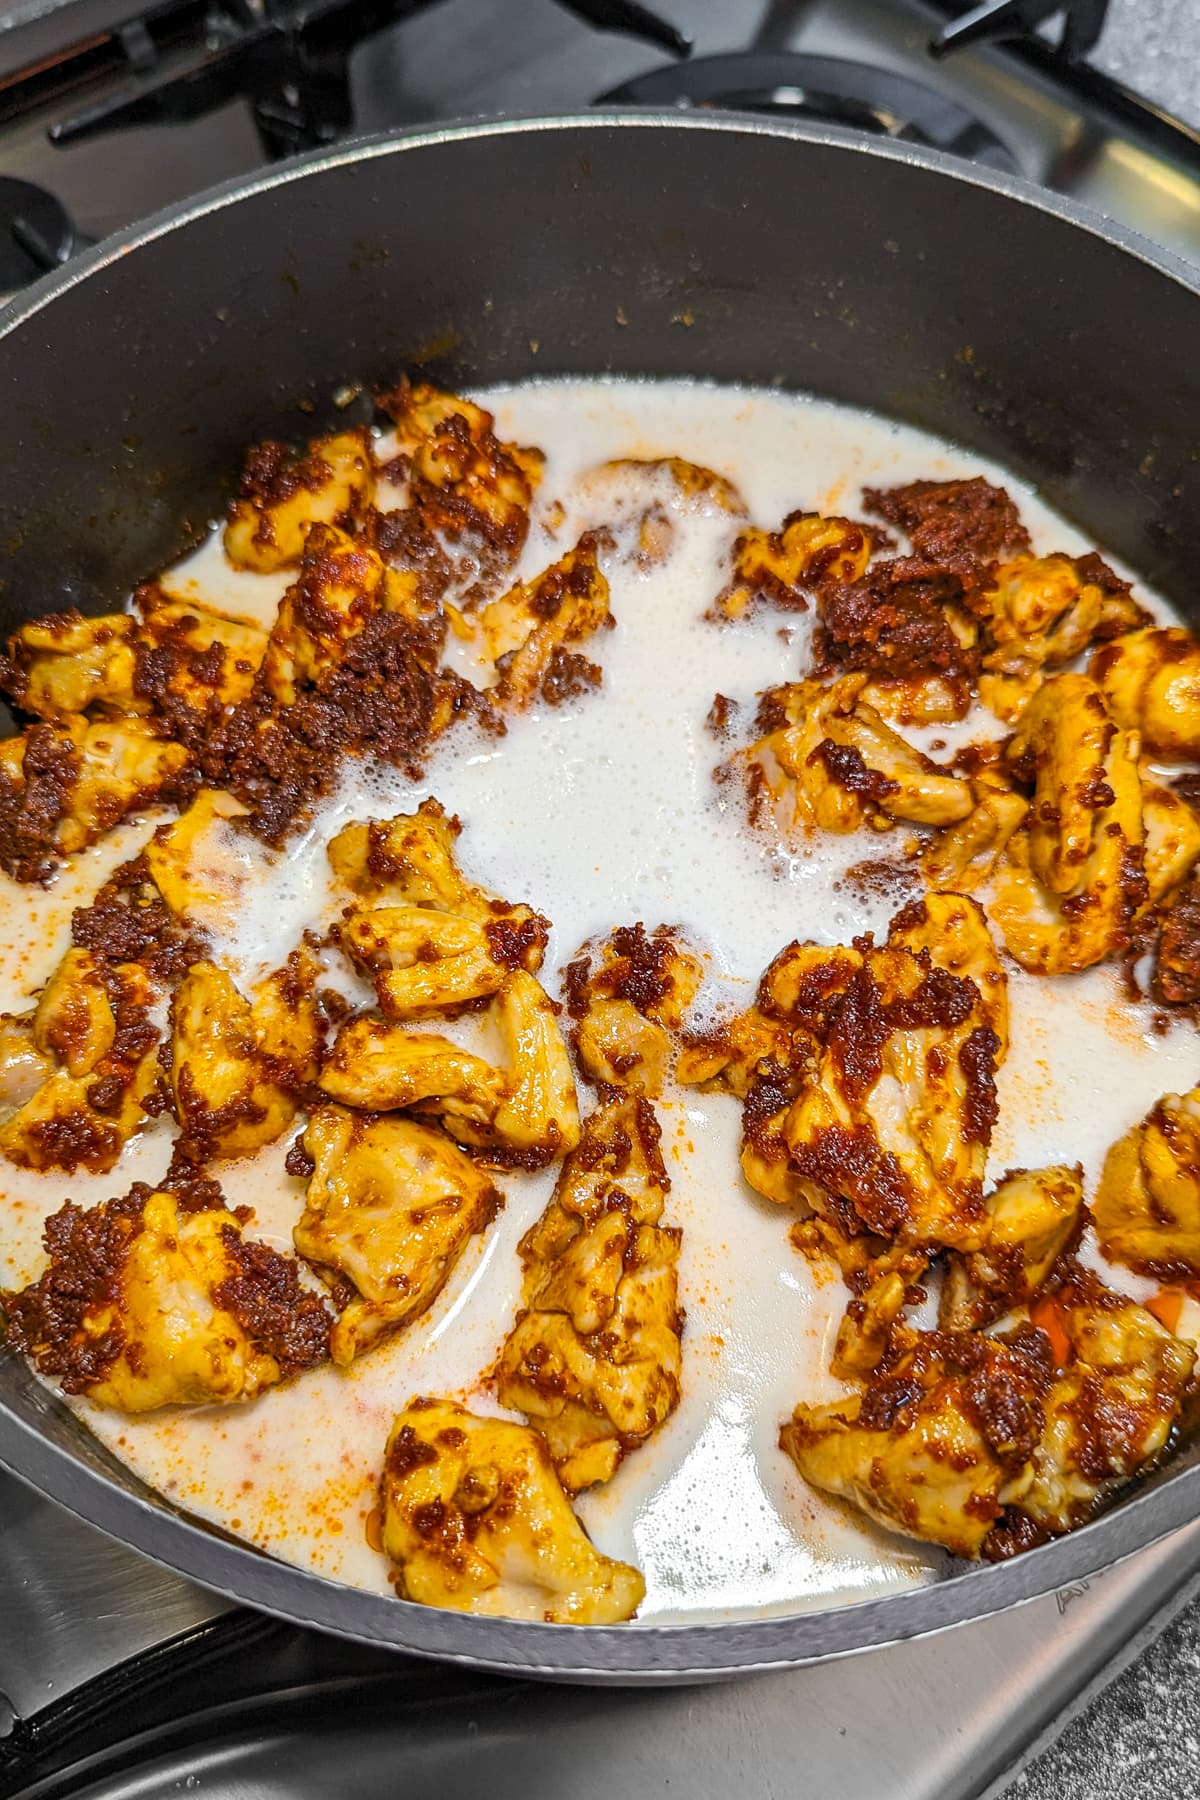 Adding milk over fried meat in a pan on the stove.